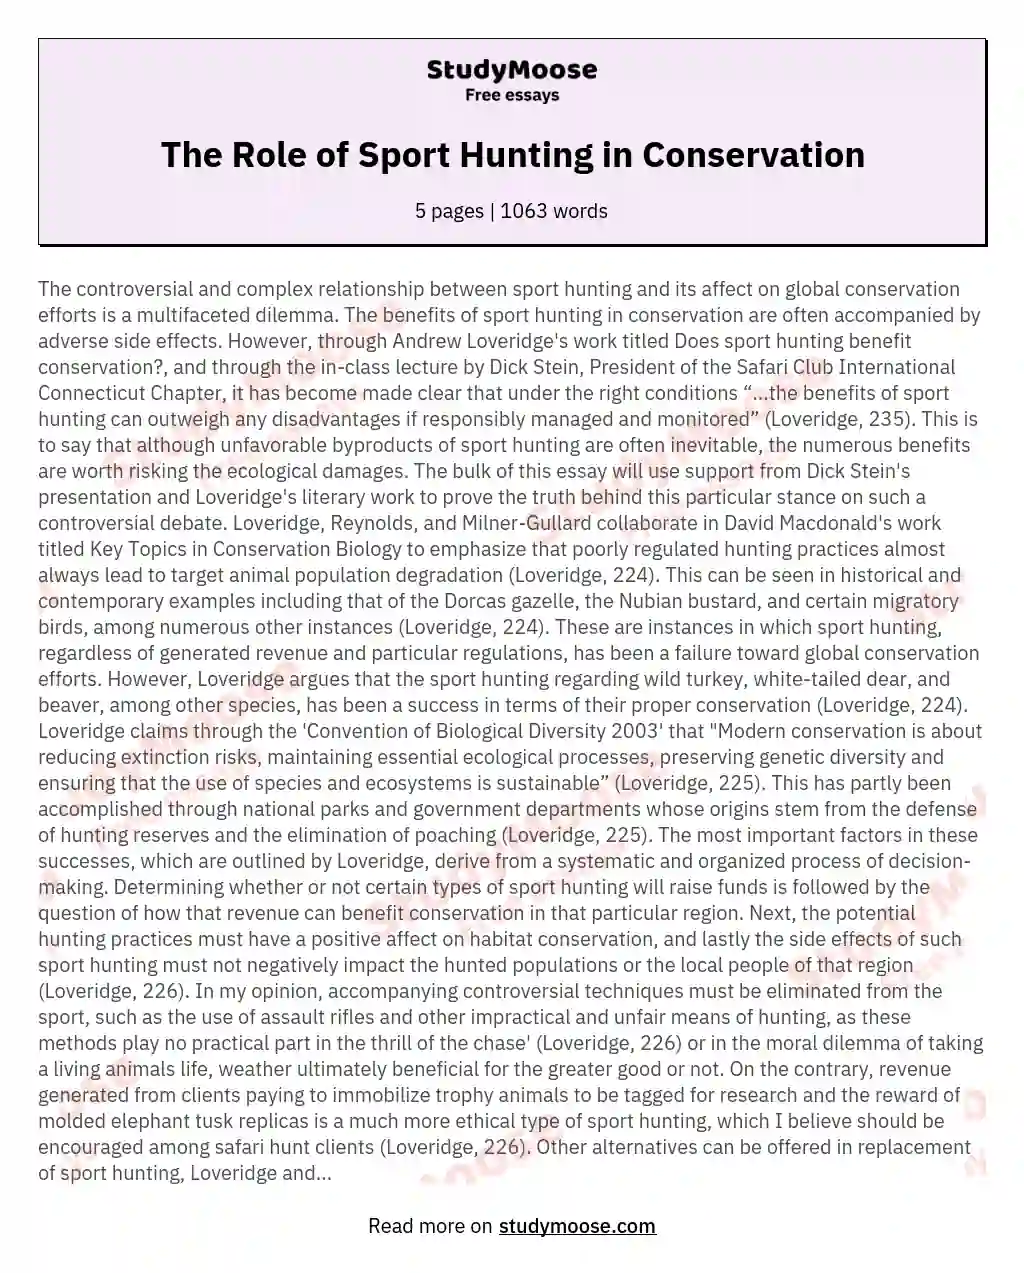 The Role of Sport Hunting in Conservation essay